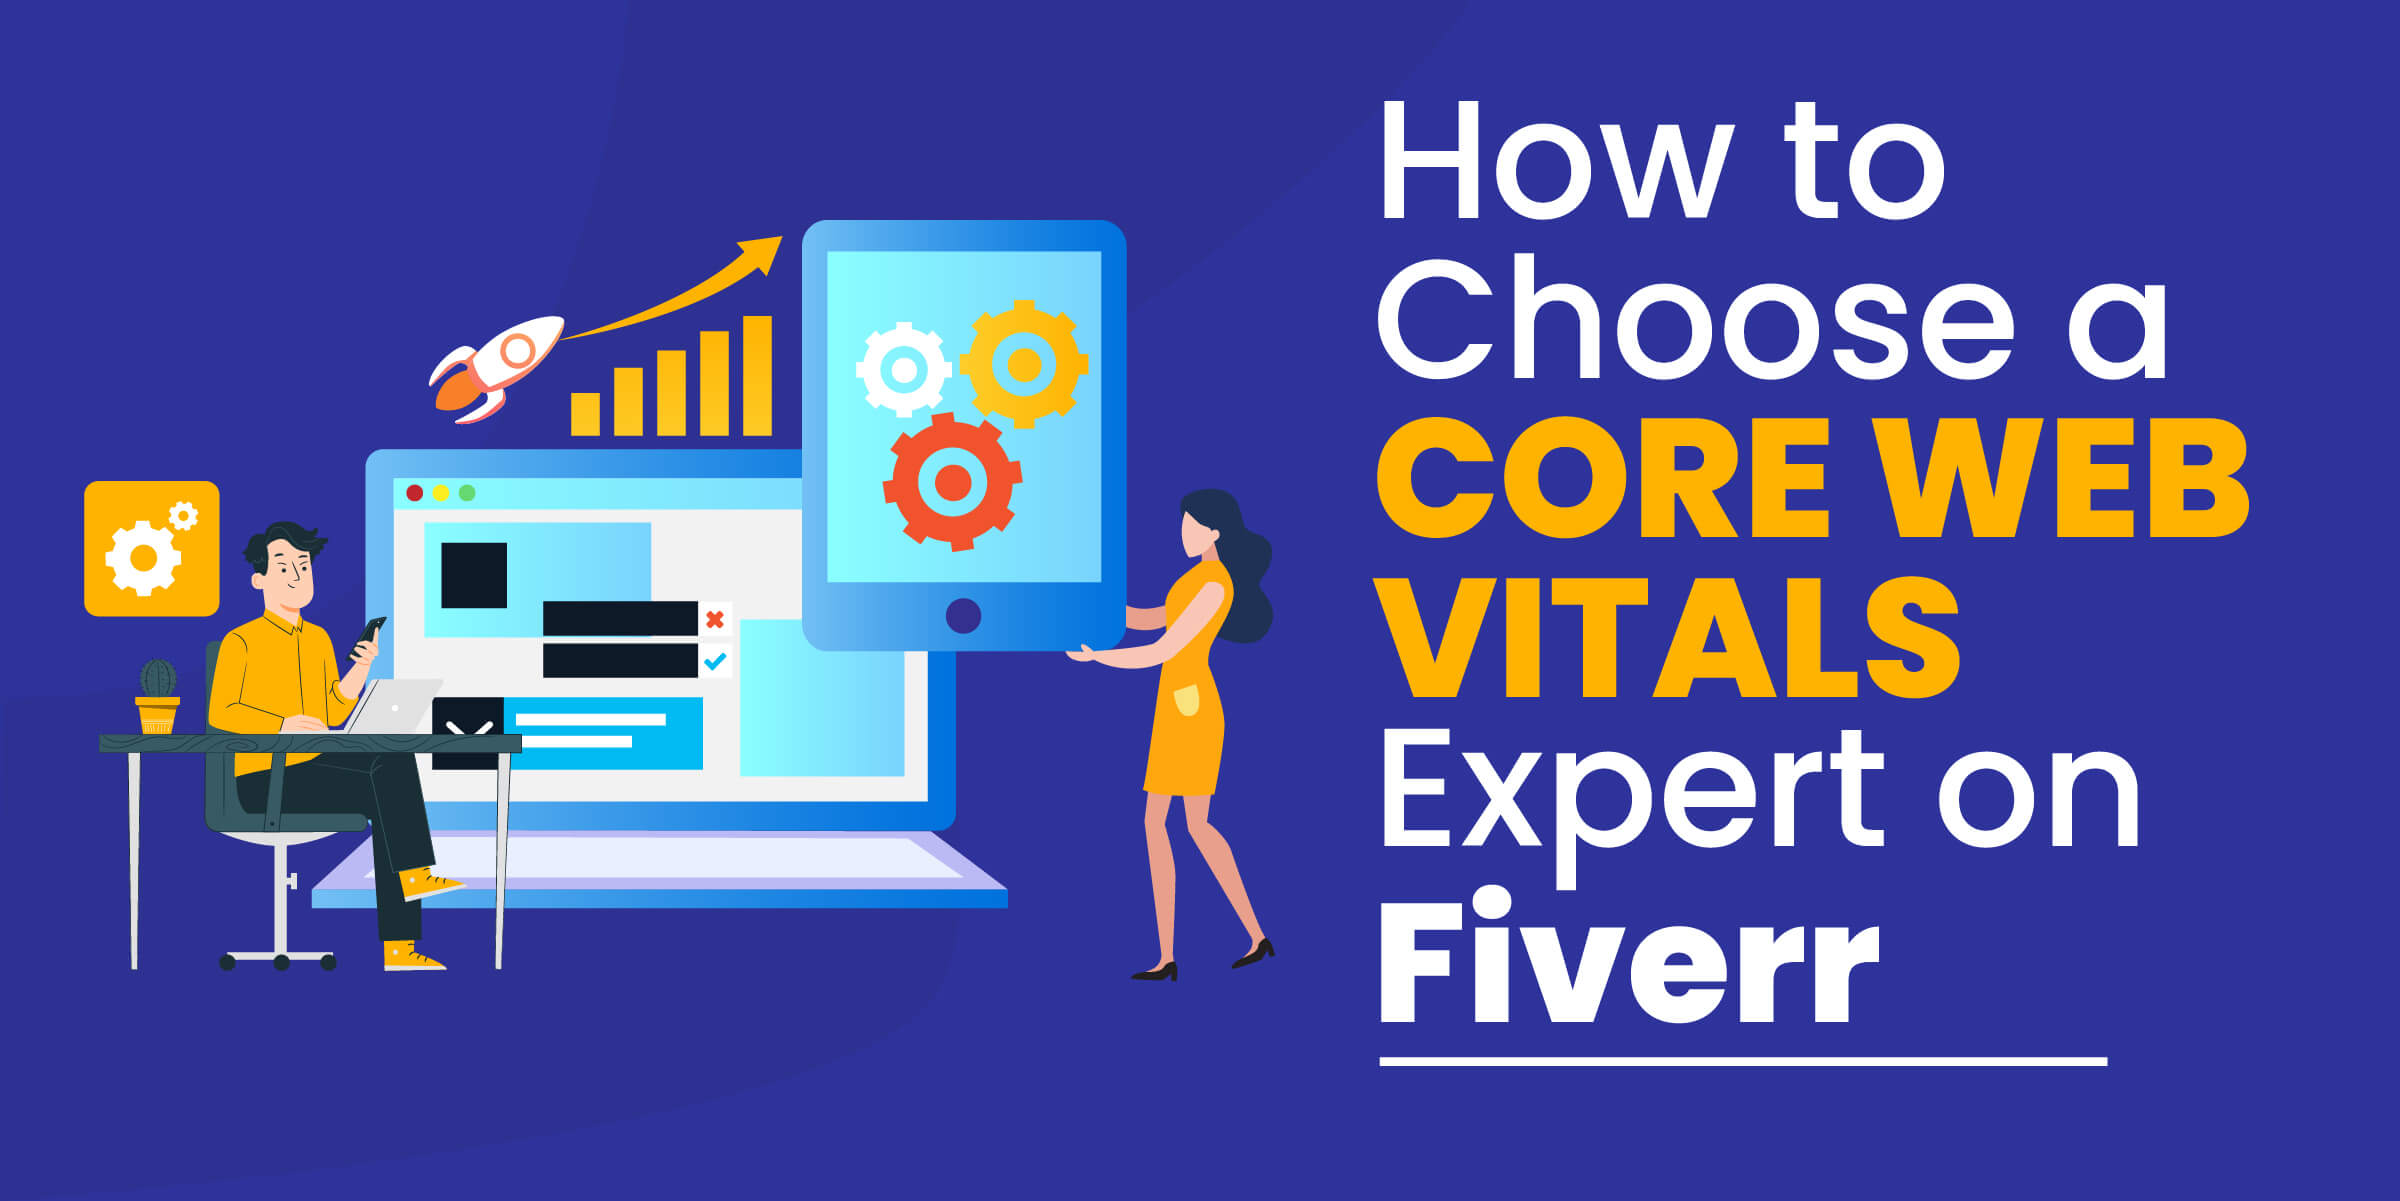 How to Choose Core Web Vitals Expert on Fiverr